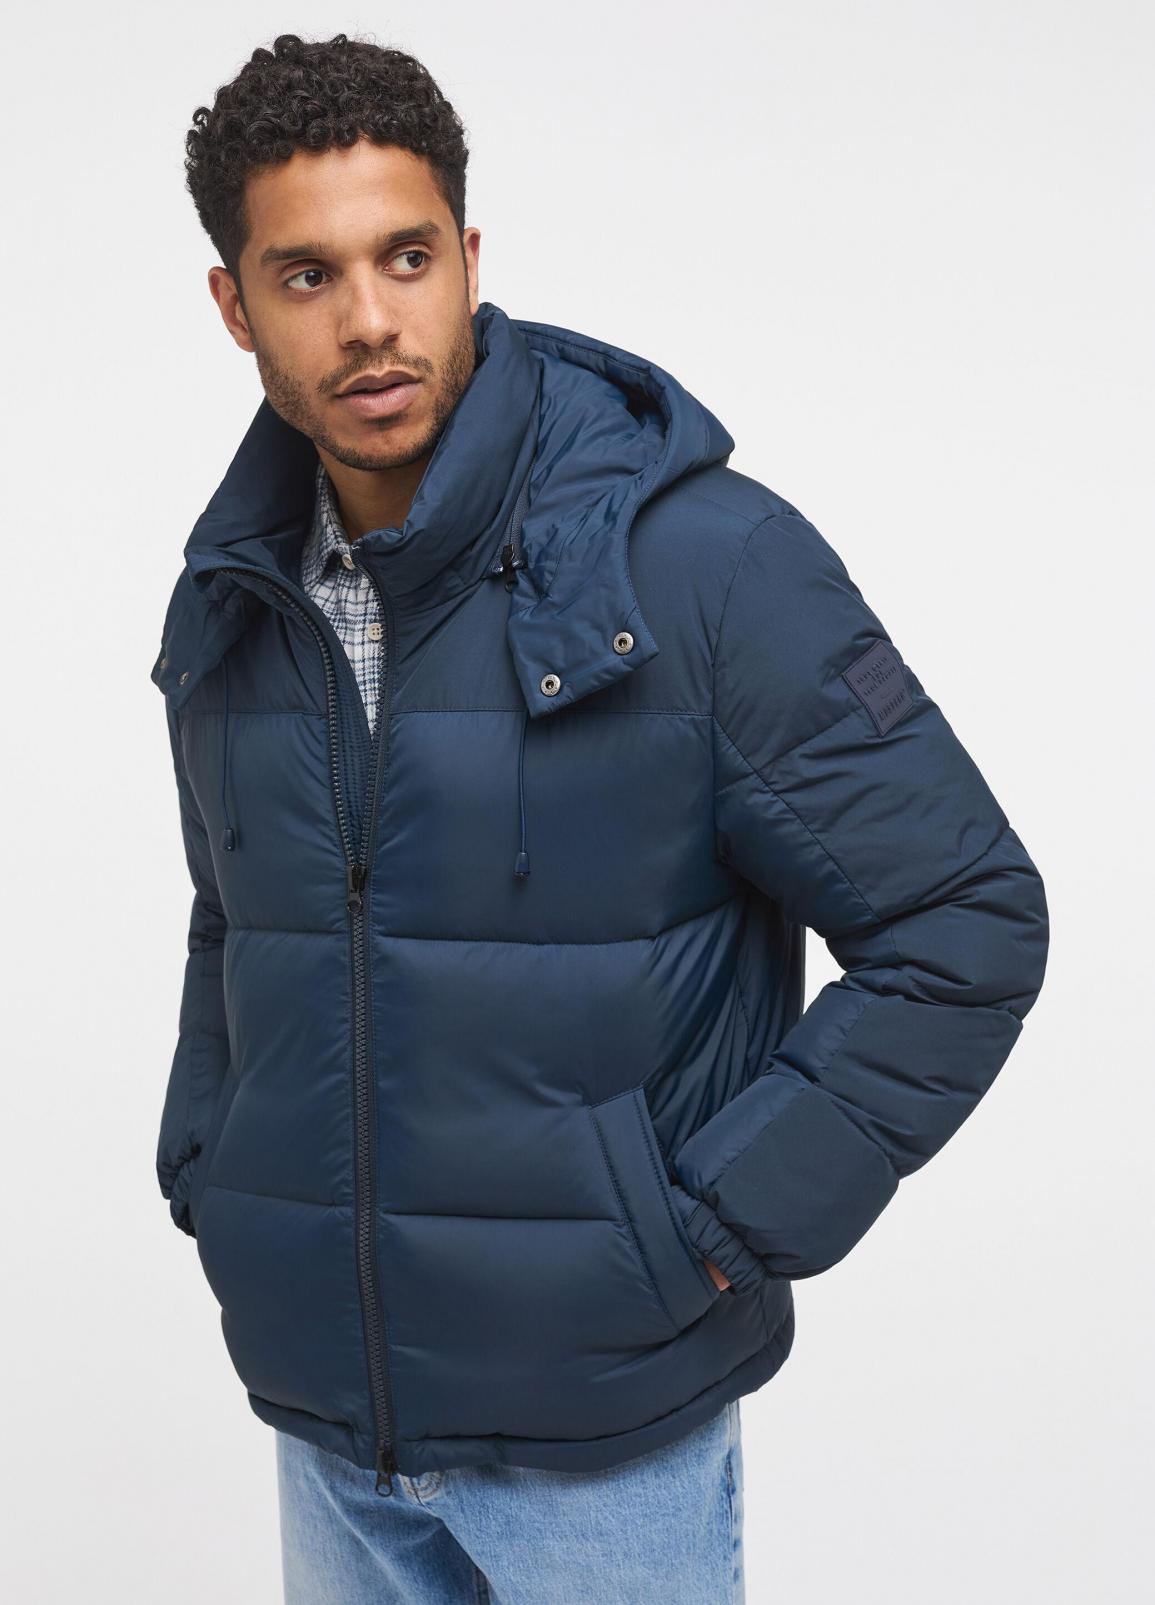 Mustang Jeans® Style Daniel Puffer Jacket - Total Eclipse